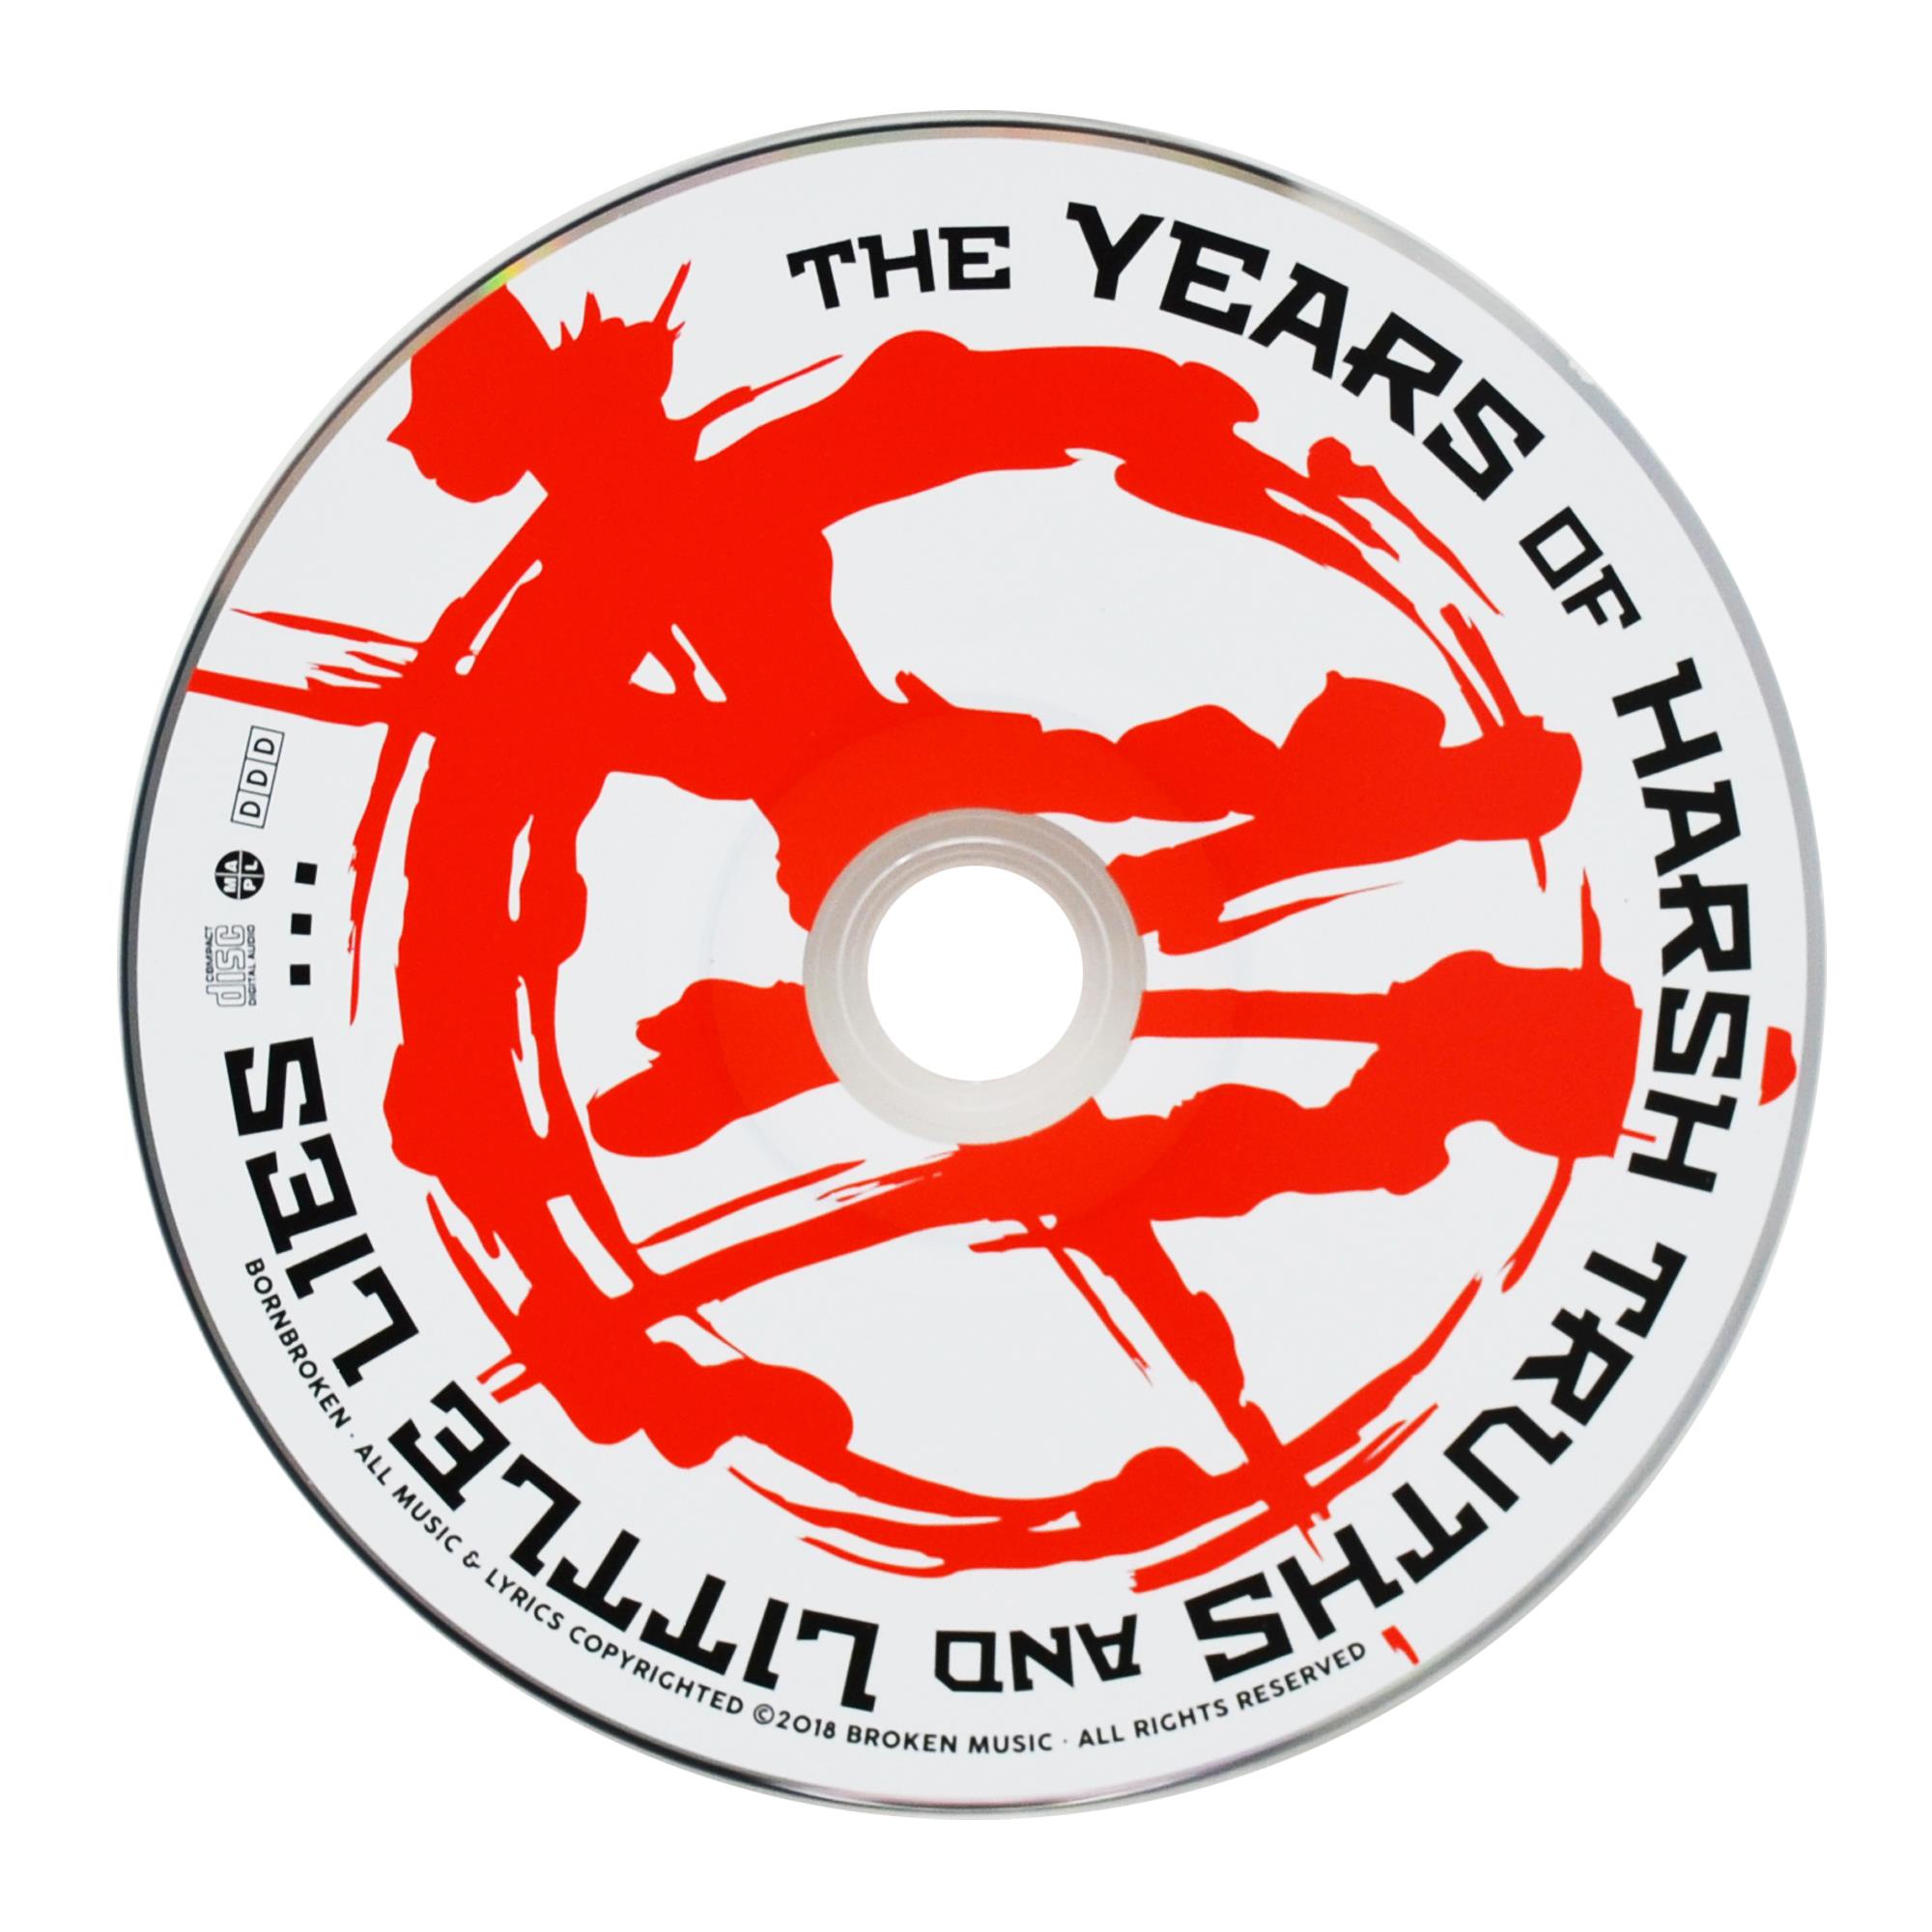 The Years of Harsh Truths and Little Lies CD